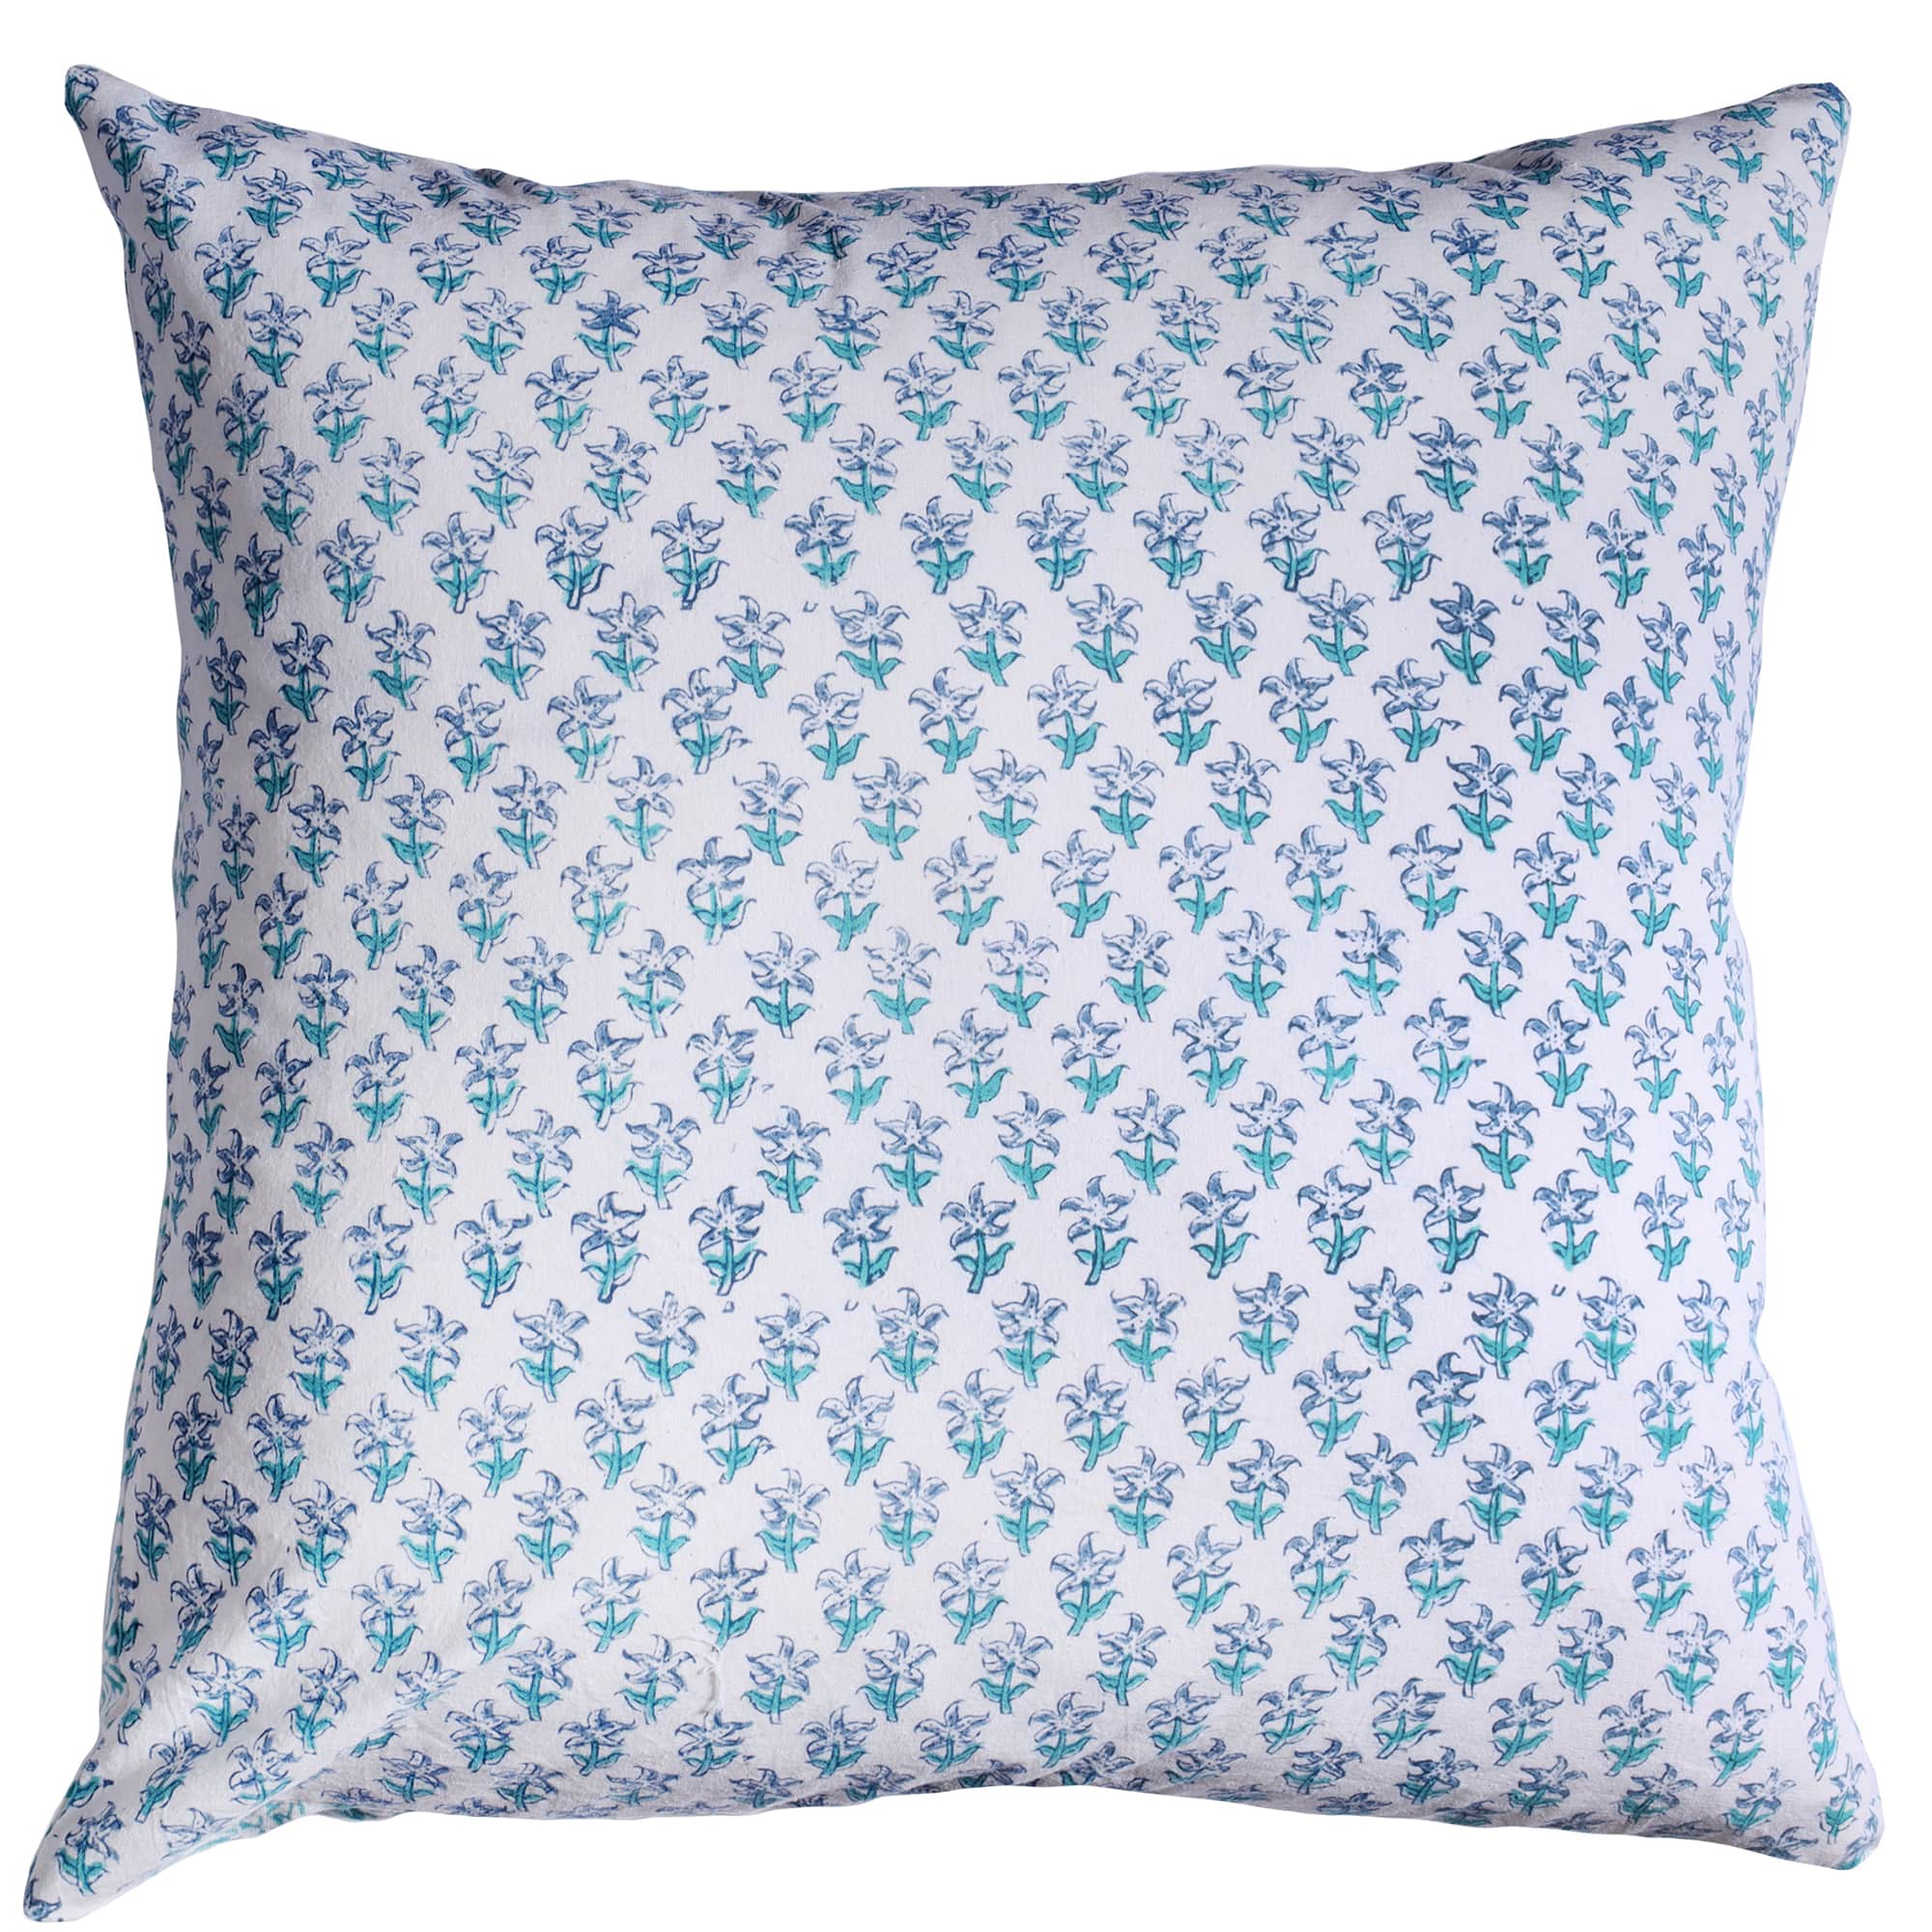 Reverse of Coastal Blue Coraline cushion with  print of blue small starfish shaped flowers on a white background